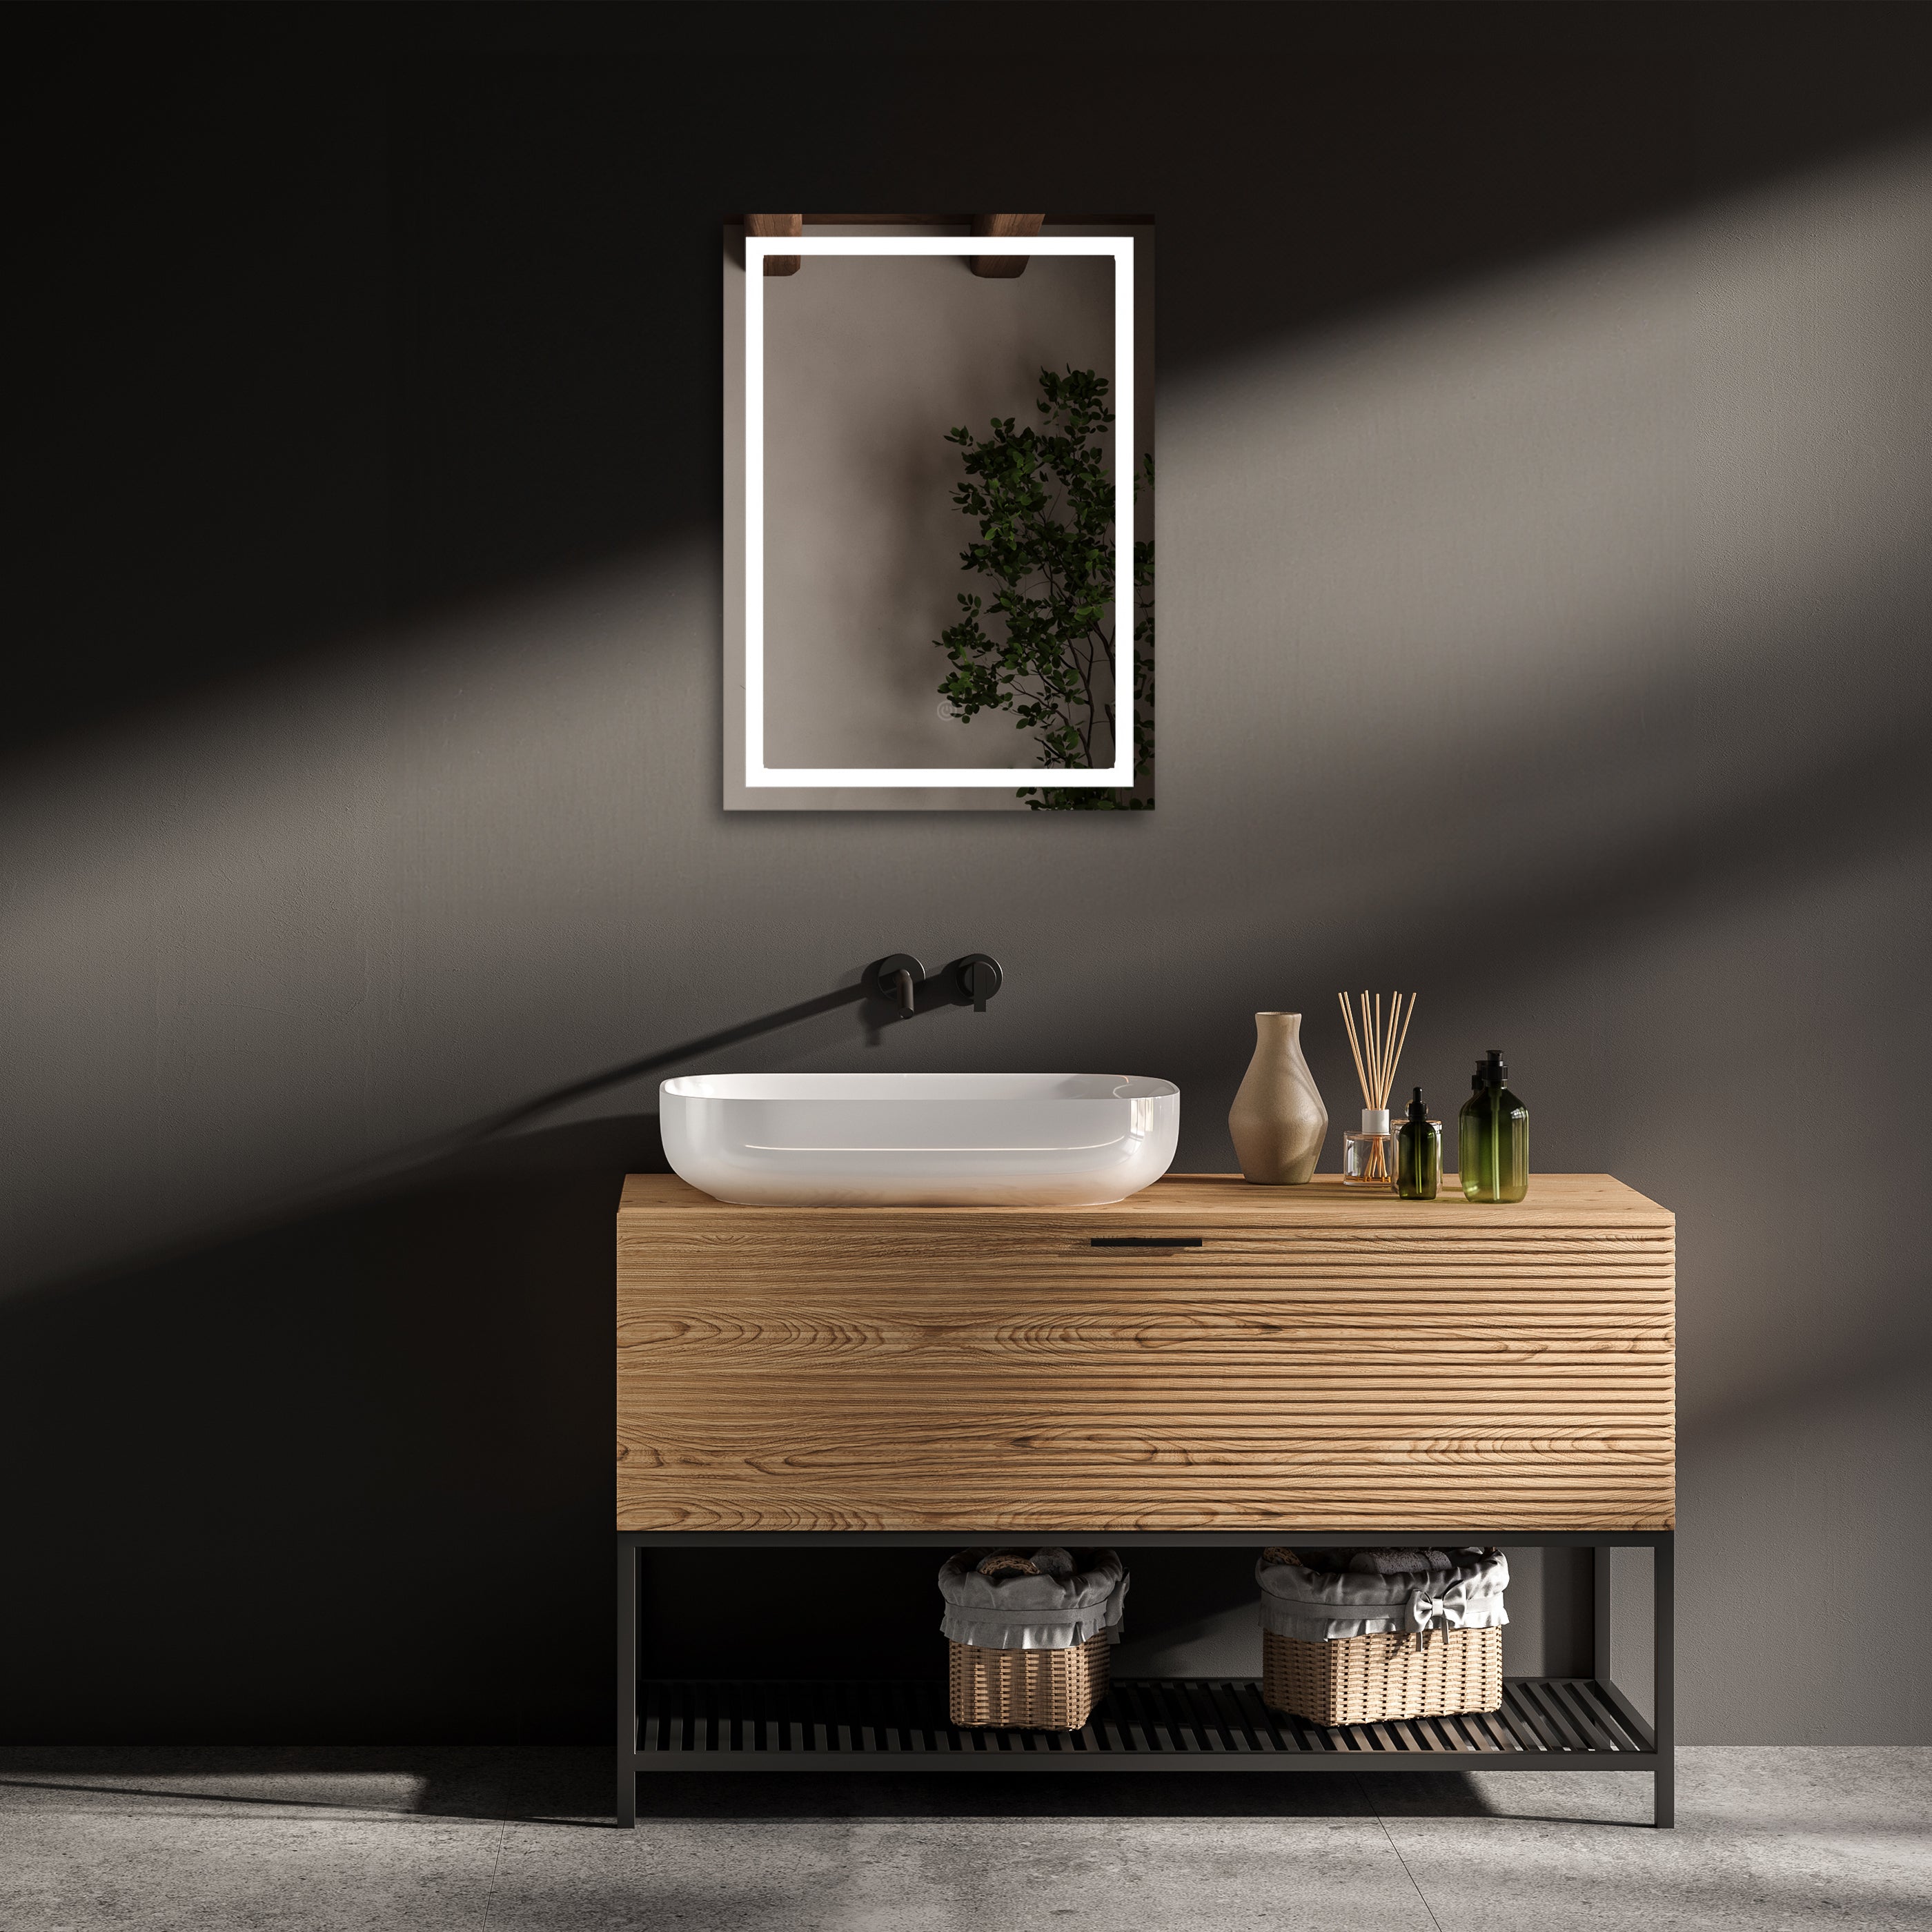 Riga LED Mirror w/ Dimmer & Defogger - Available in 4 Sizes - Dreamwerks